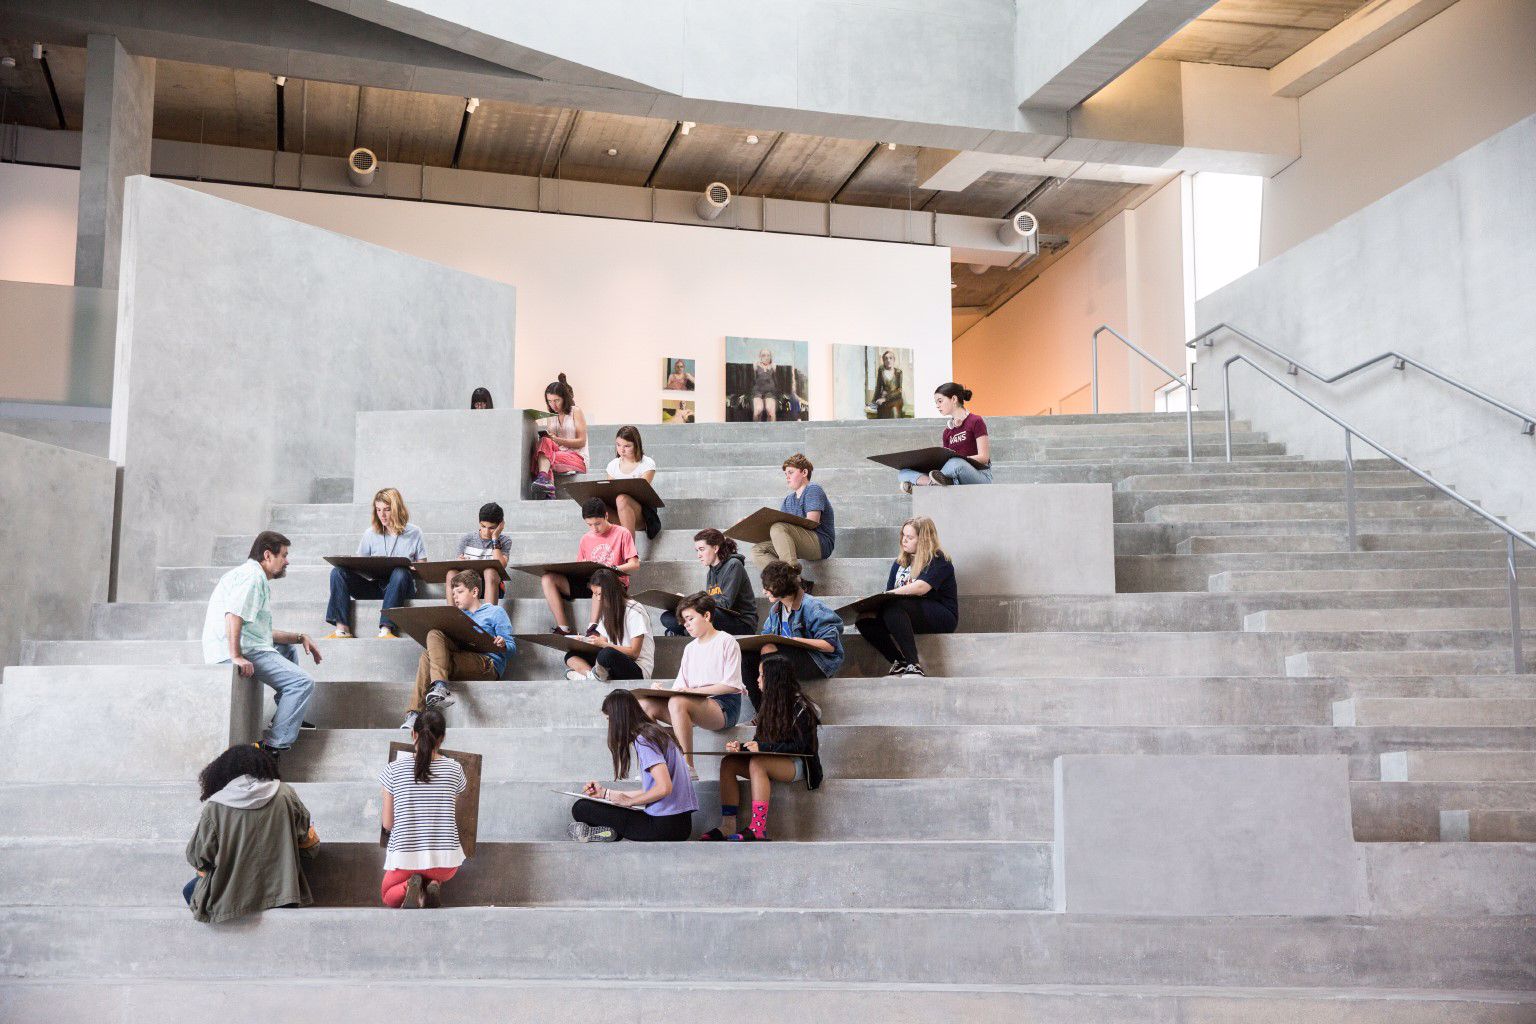 https://static.mfah.com/images/glassell-junior-school-drawing-class---central-stair.5213395745454022756.jpg?width=1536